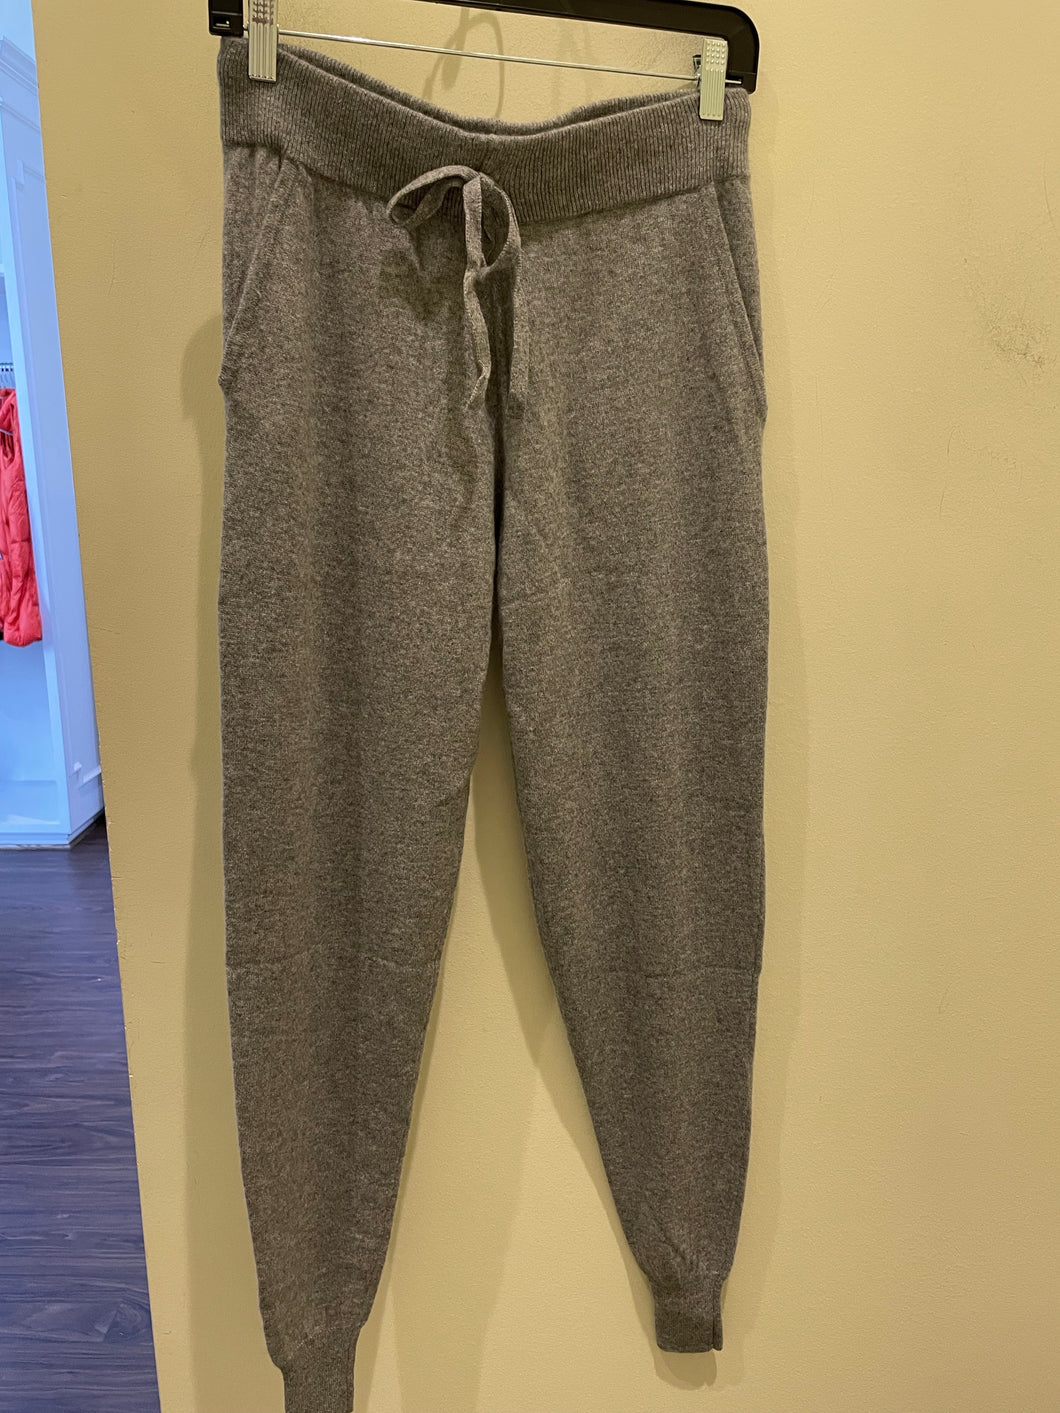 Cashmere Joggers in Heather Grey by J Society